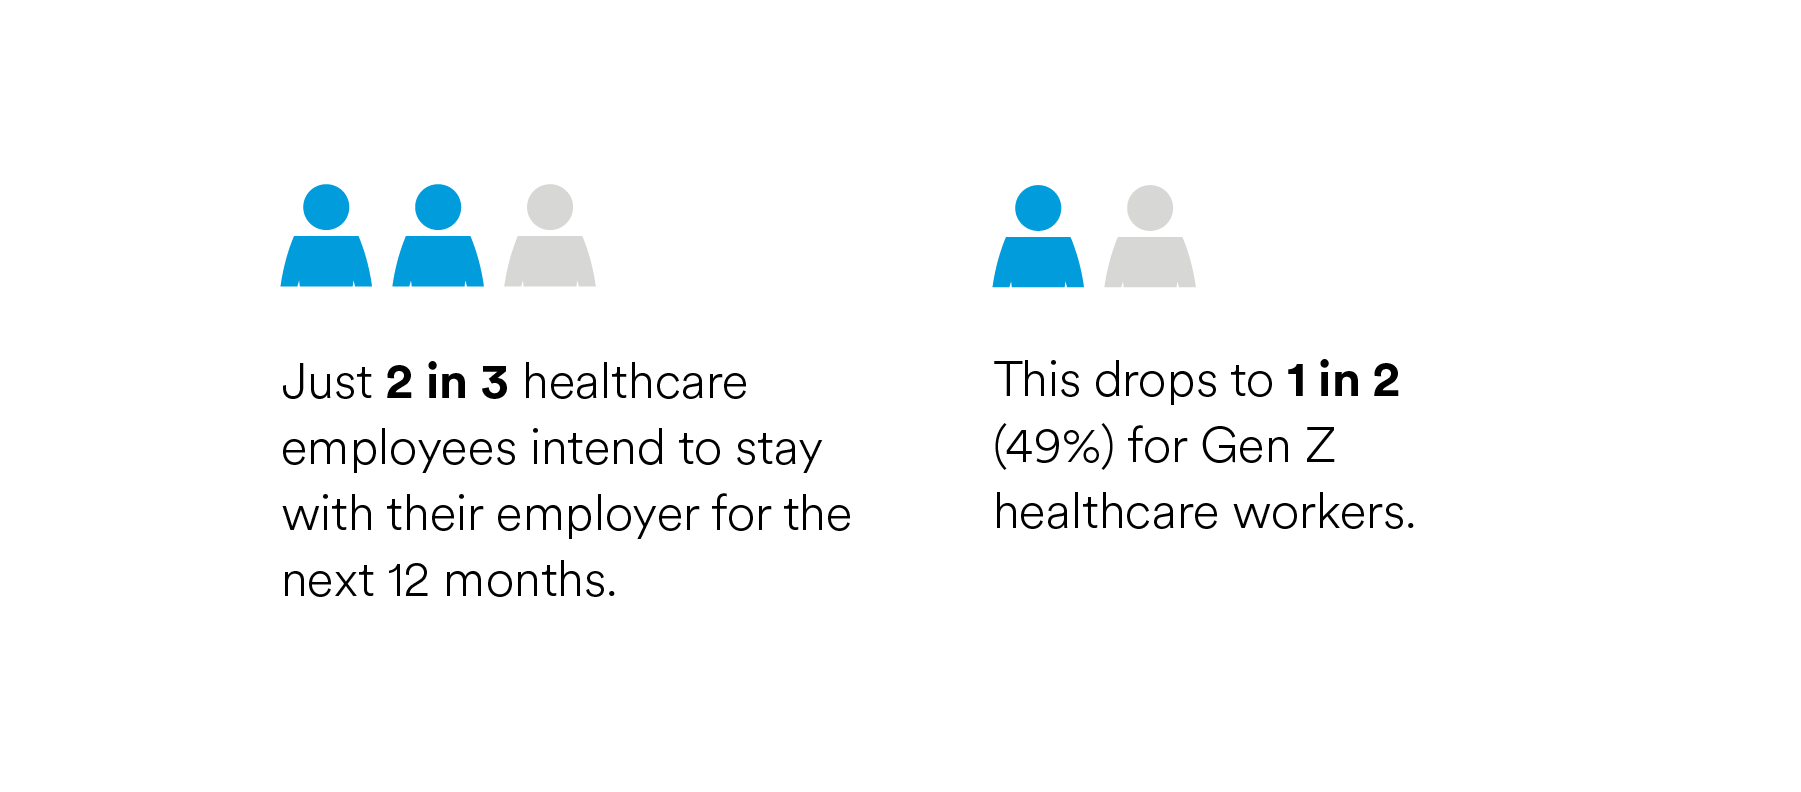 Just 2 in 3 healthcare employees intend to stay with their employer for the next 12 months. 